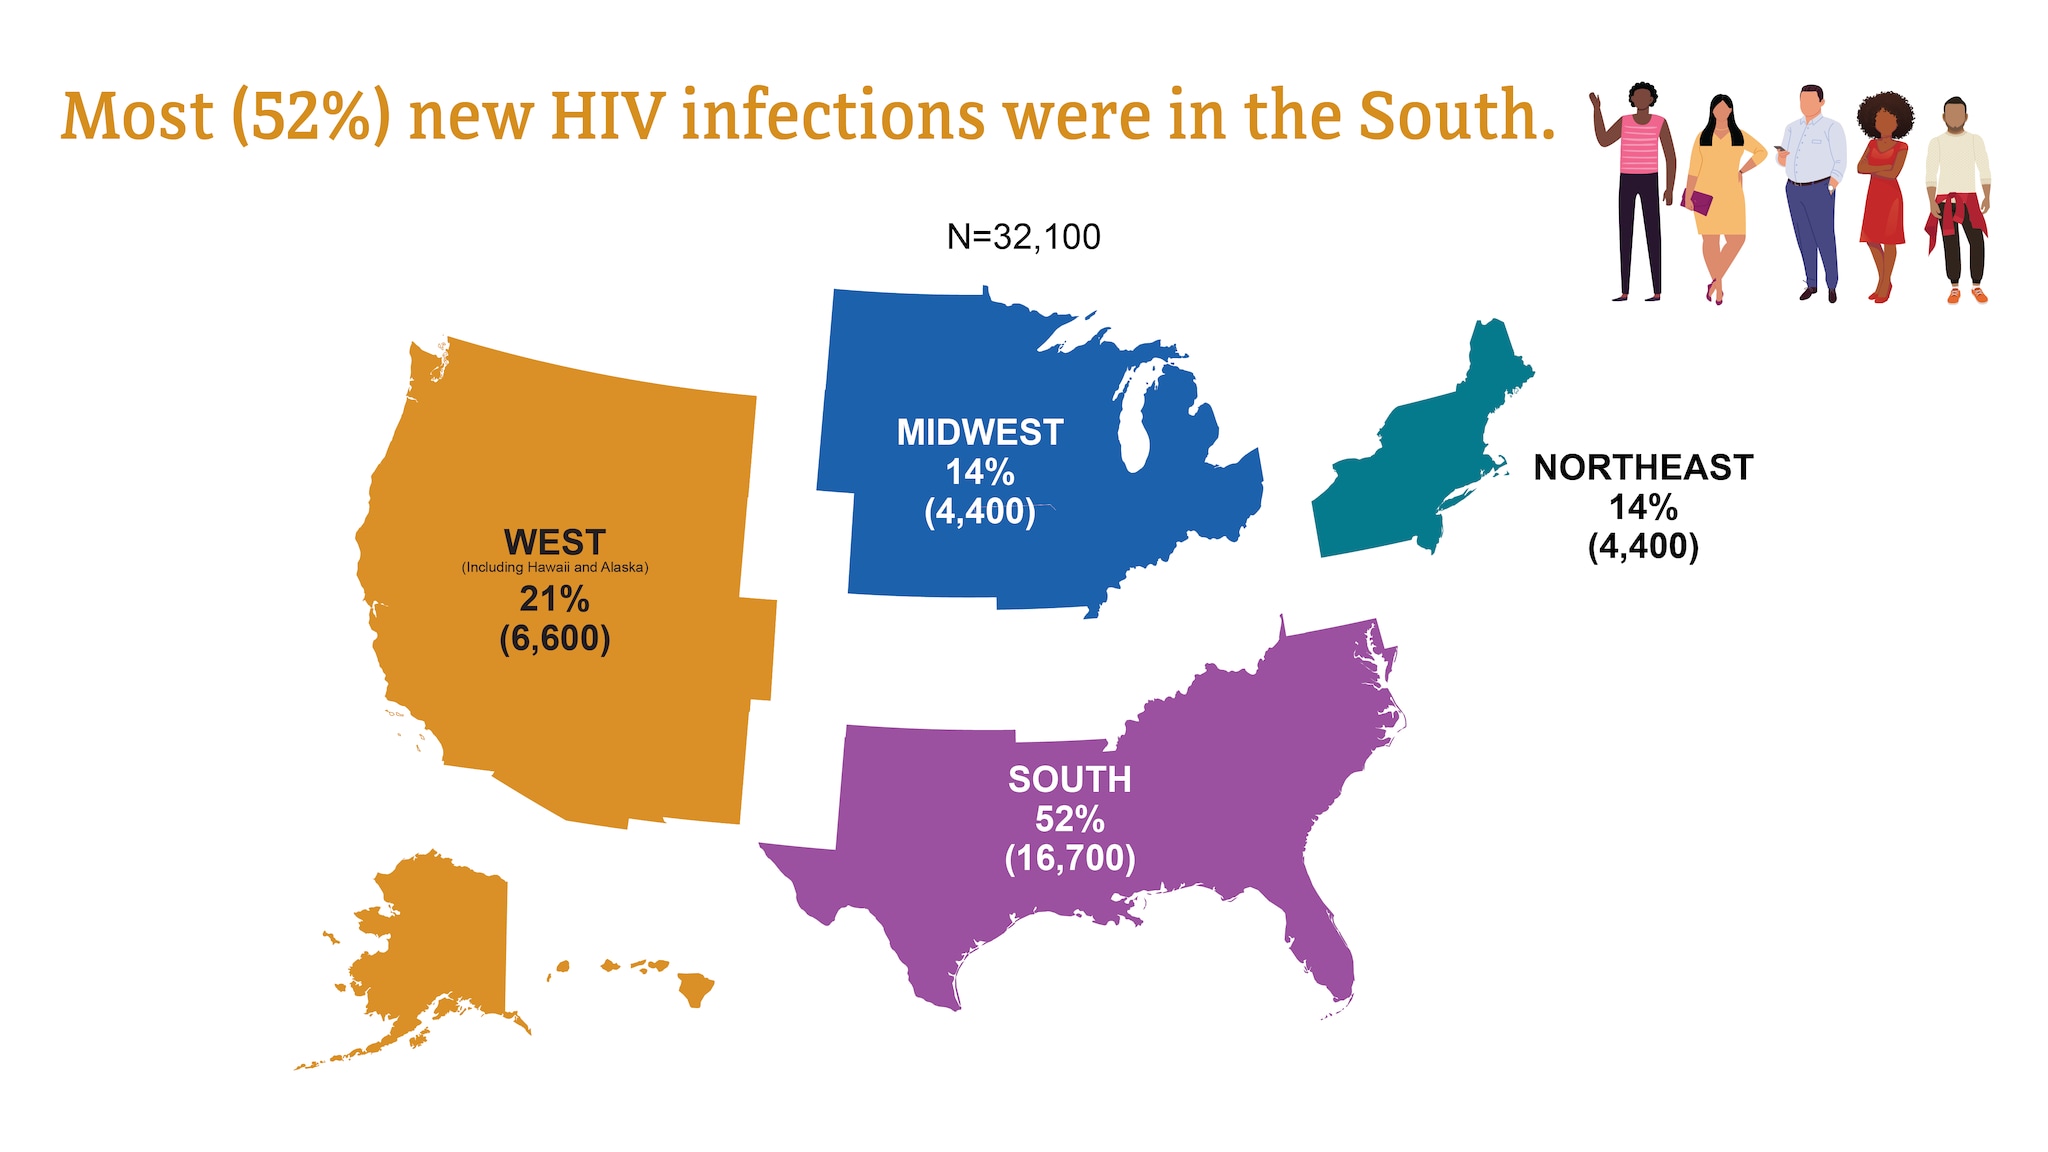 In 2021, most (52 percent) of new HIV infections were in the South. The West saw 21 percent of new infections, the Midwest saw 14 percent of new infections, and the Northeast saw 14 percent of new infections.